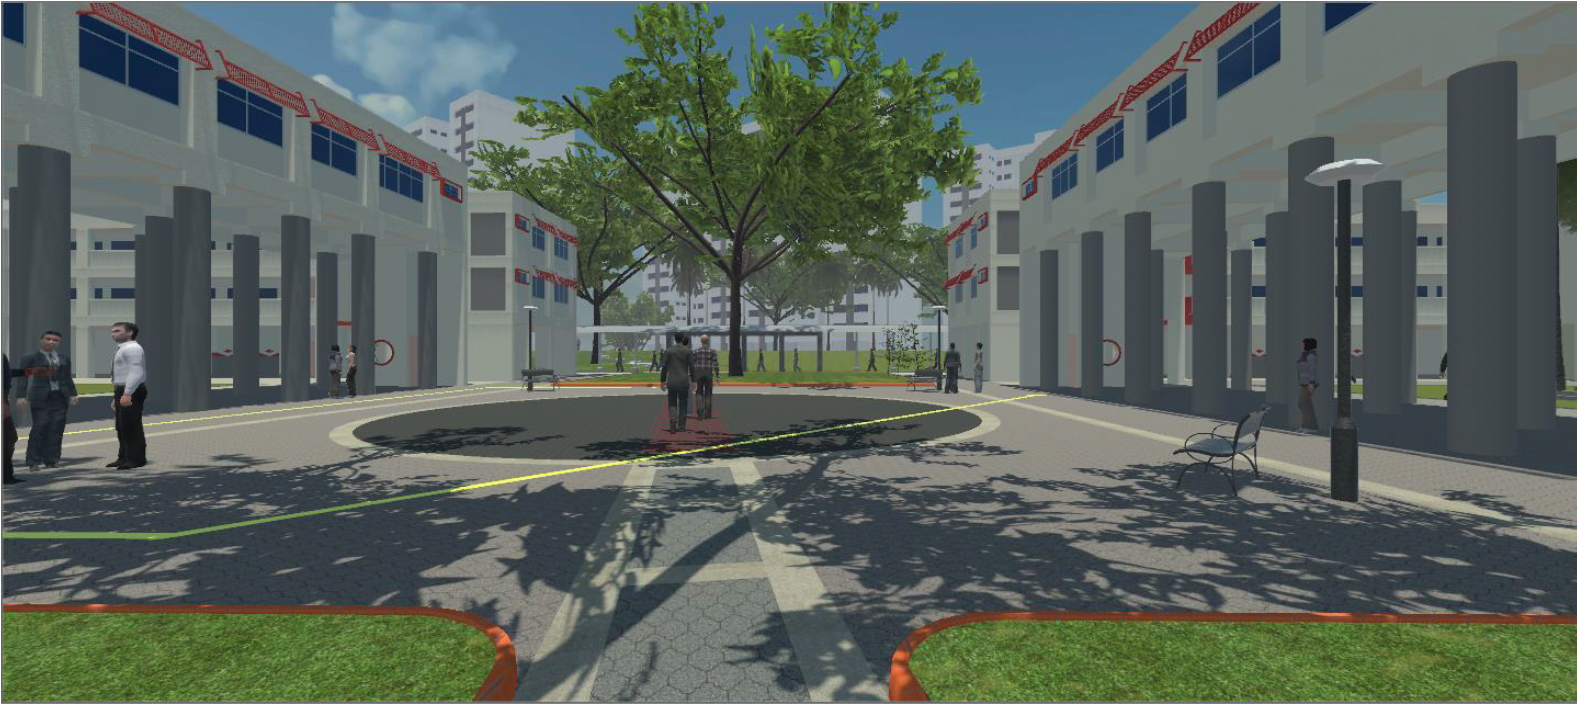 Future Cities Laboratory conducted a virtual reality experiment to test what makes streets more walkable